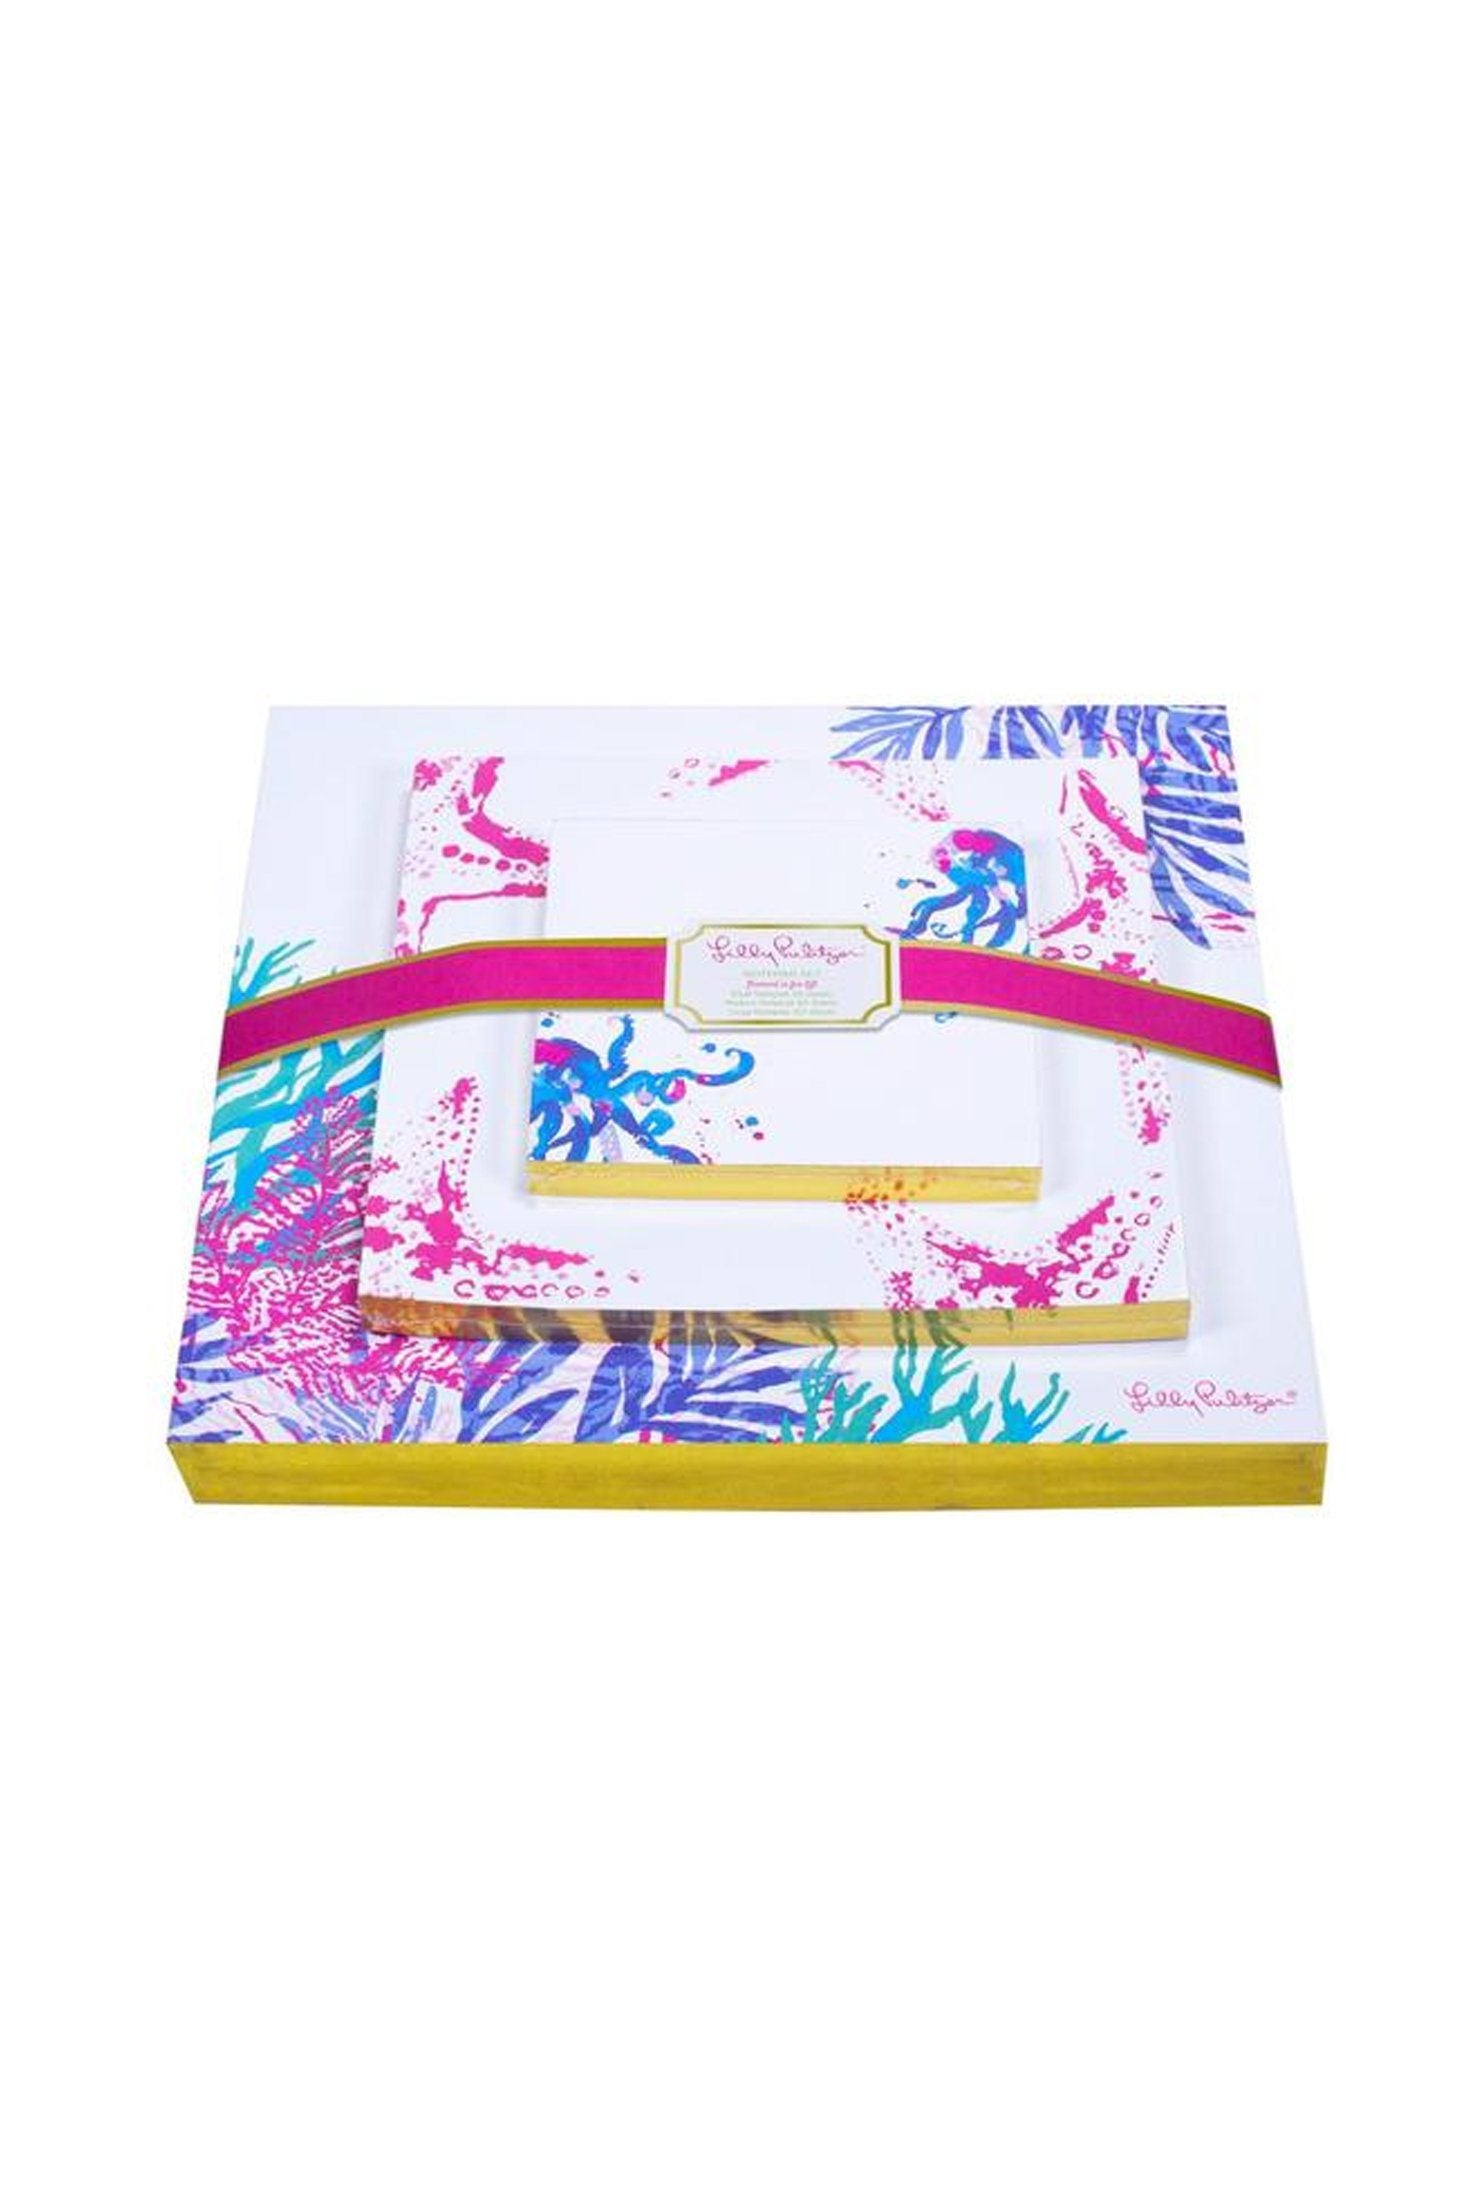 Lilly Pulitzer Note Pad Set, Accessories, Lilly Pulitzer, - Sunny and Southern,